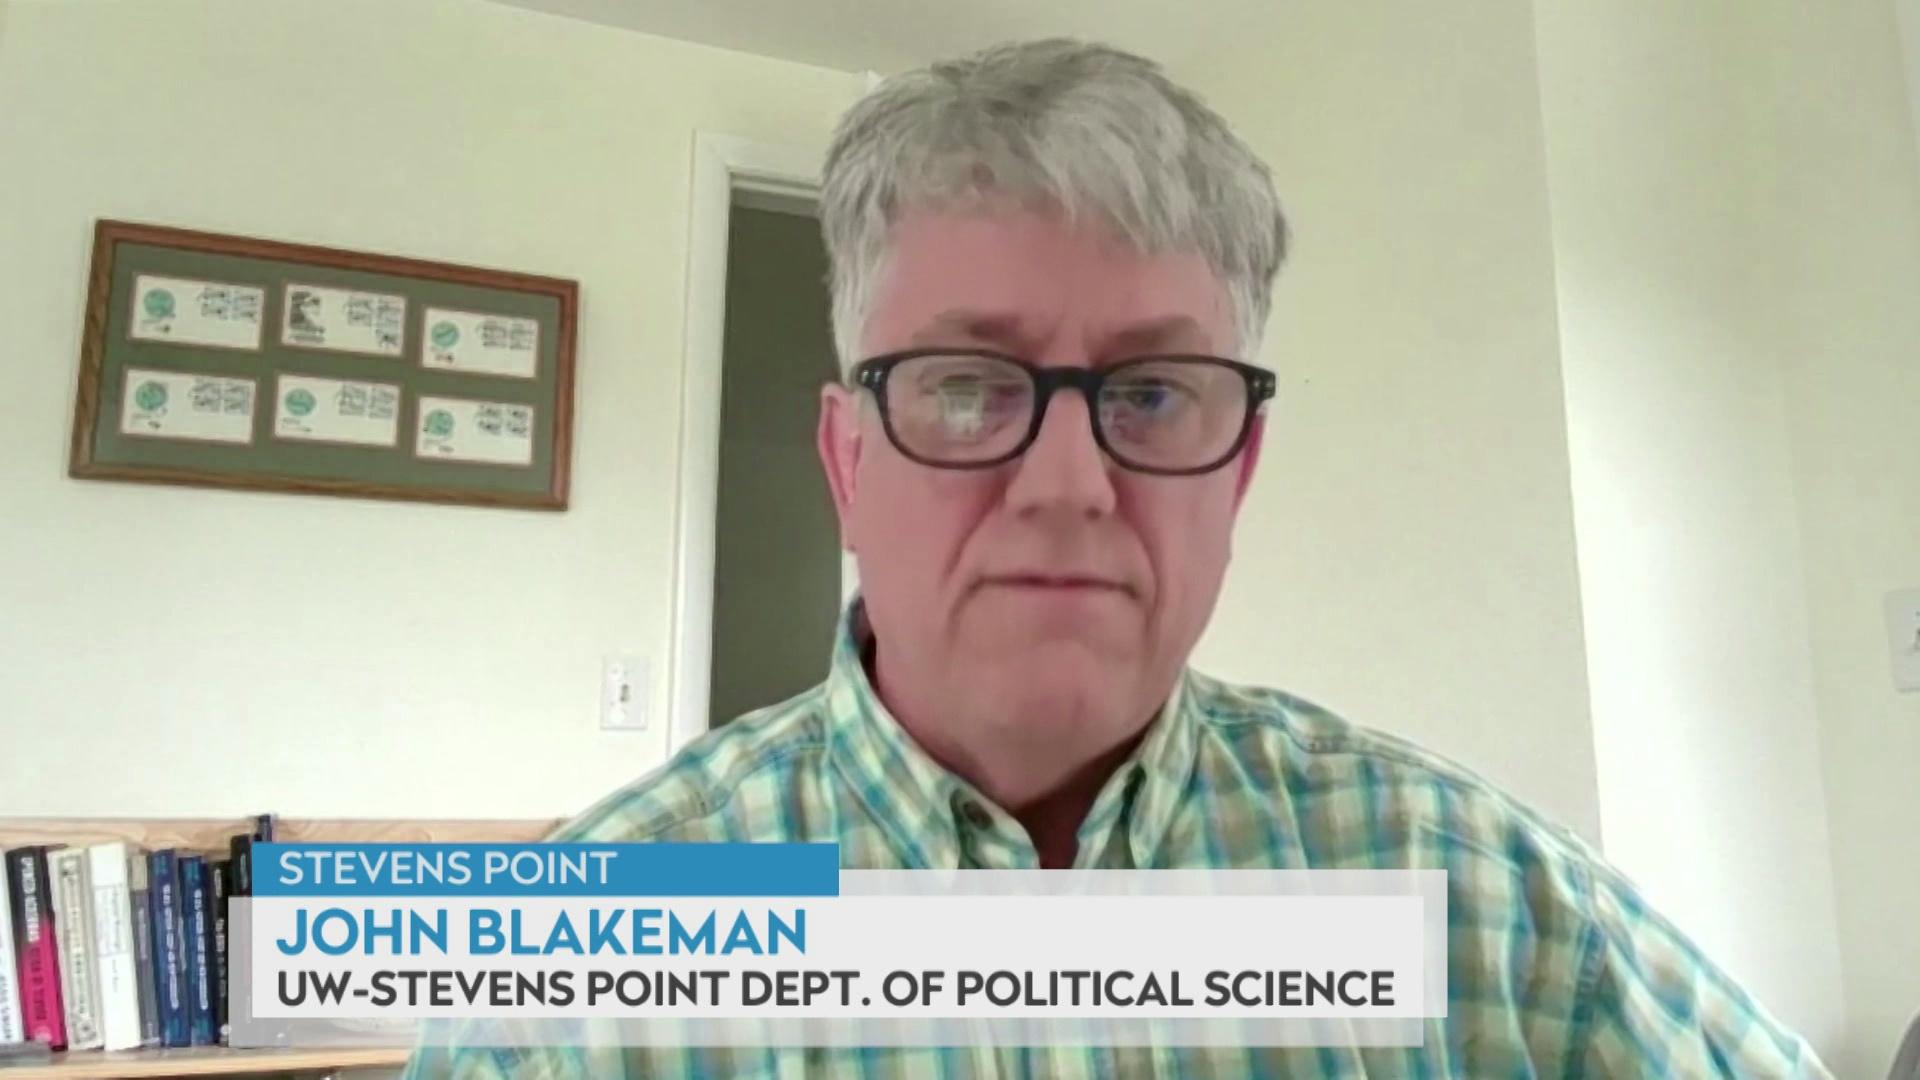 A still image from a video shows John Blakeman seated in front of a doorframe and framed artwork to his left, with a graphic at bottom reading 'Stevens Point,' 'John Blakeman' and 'UW-Stevens Point Dept. of Political Science.'